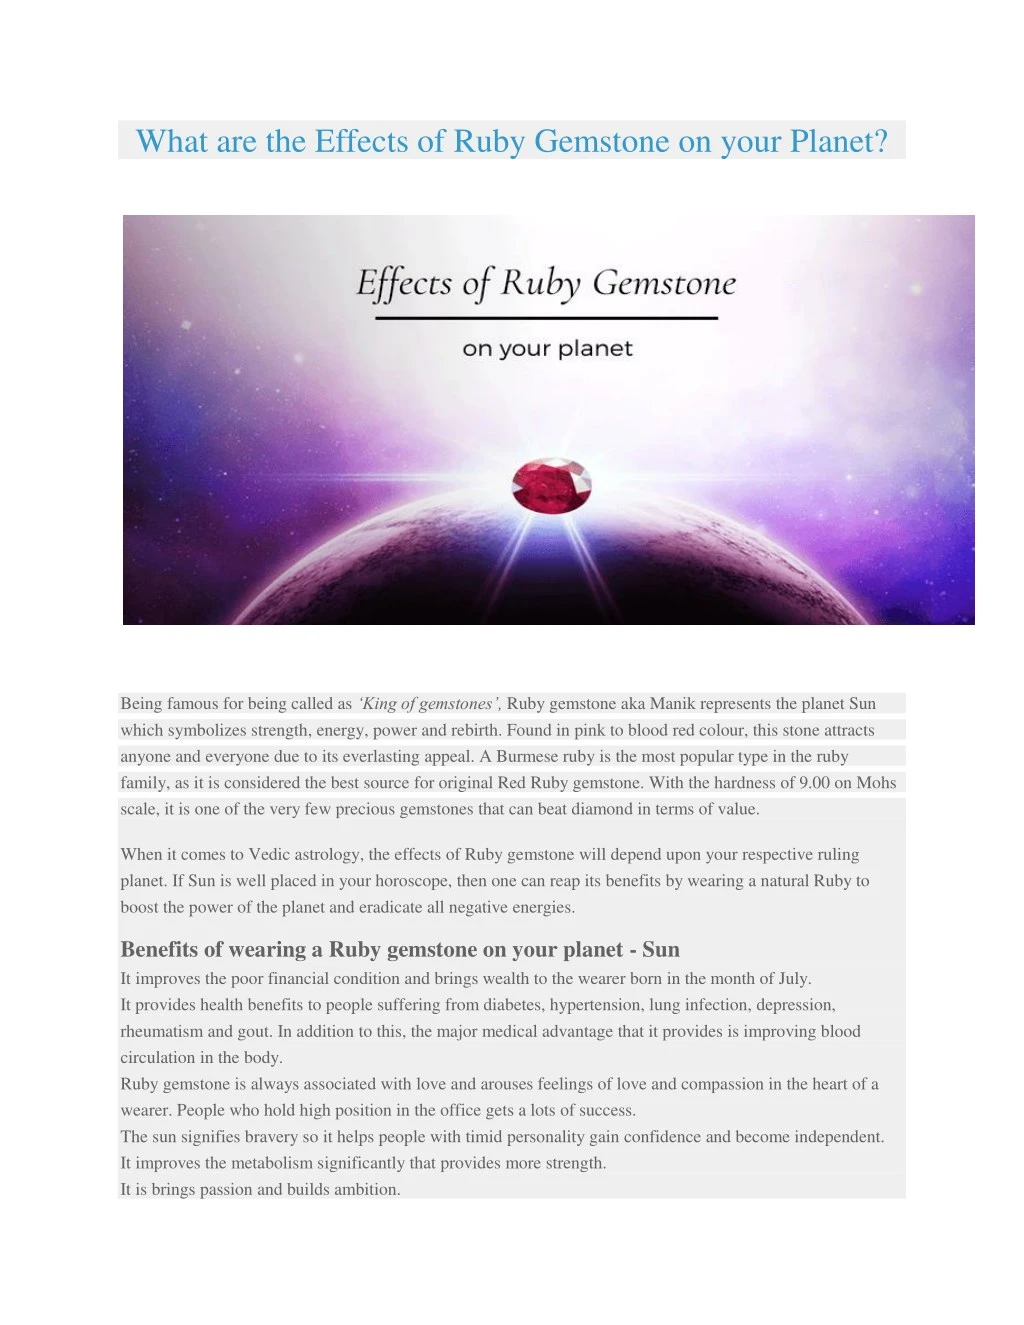 what are the effects of ruby gemstone on your